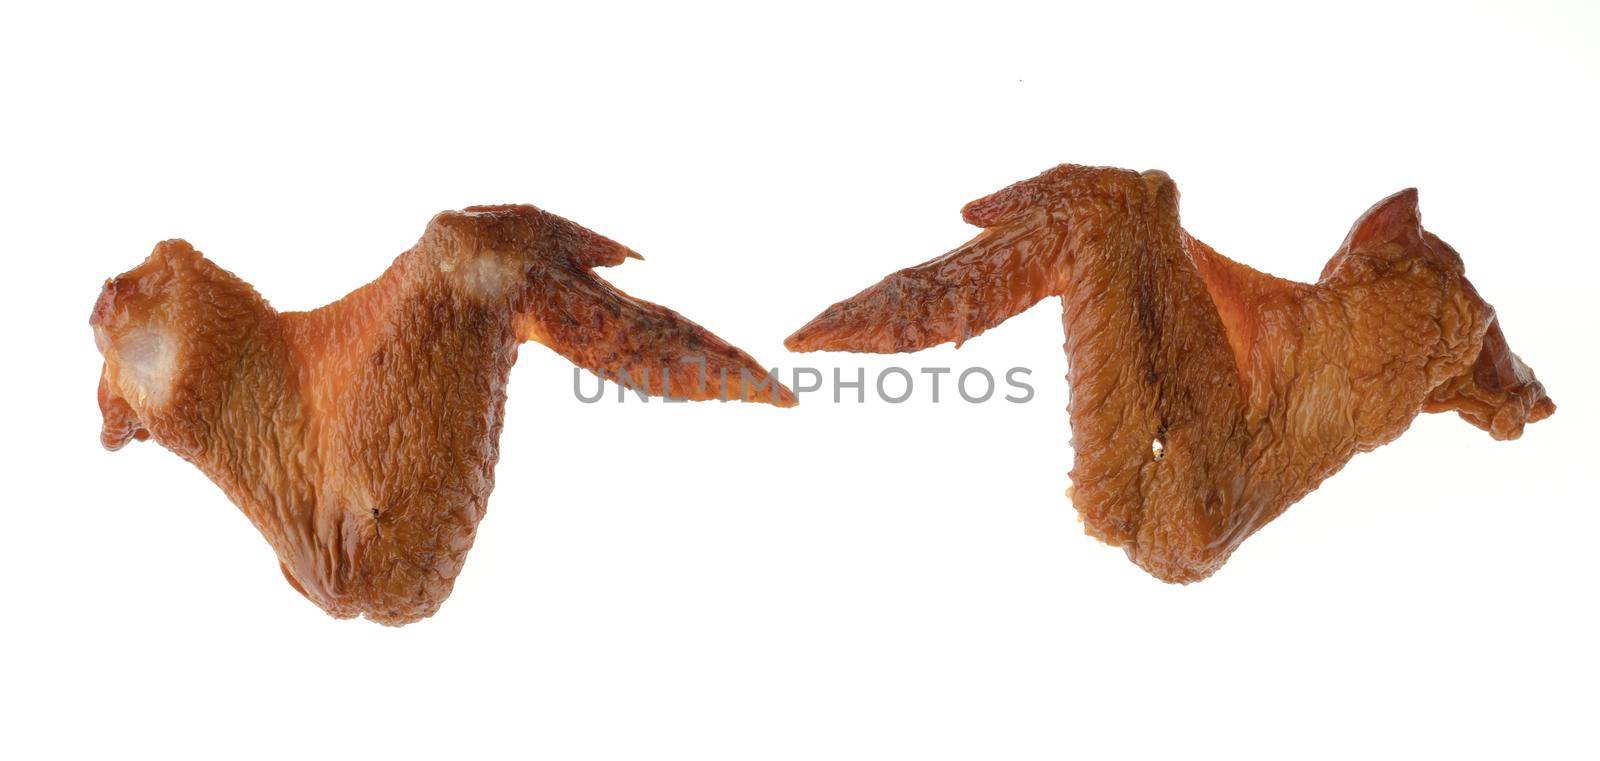 Smoked chicken wings, on a white background in isolation by A_A